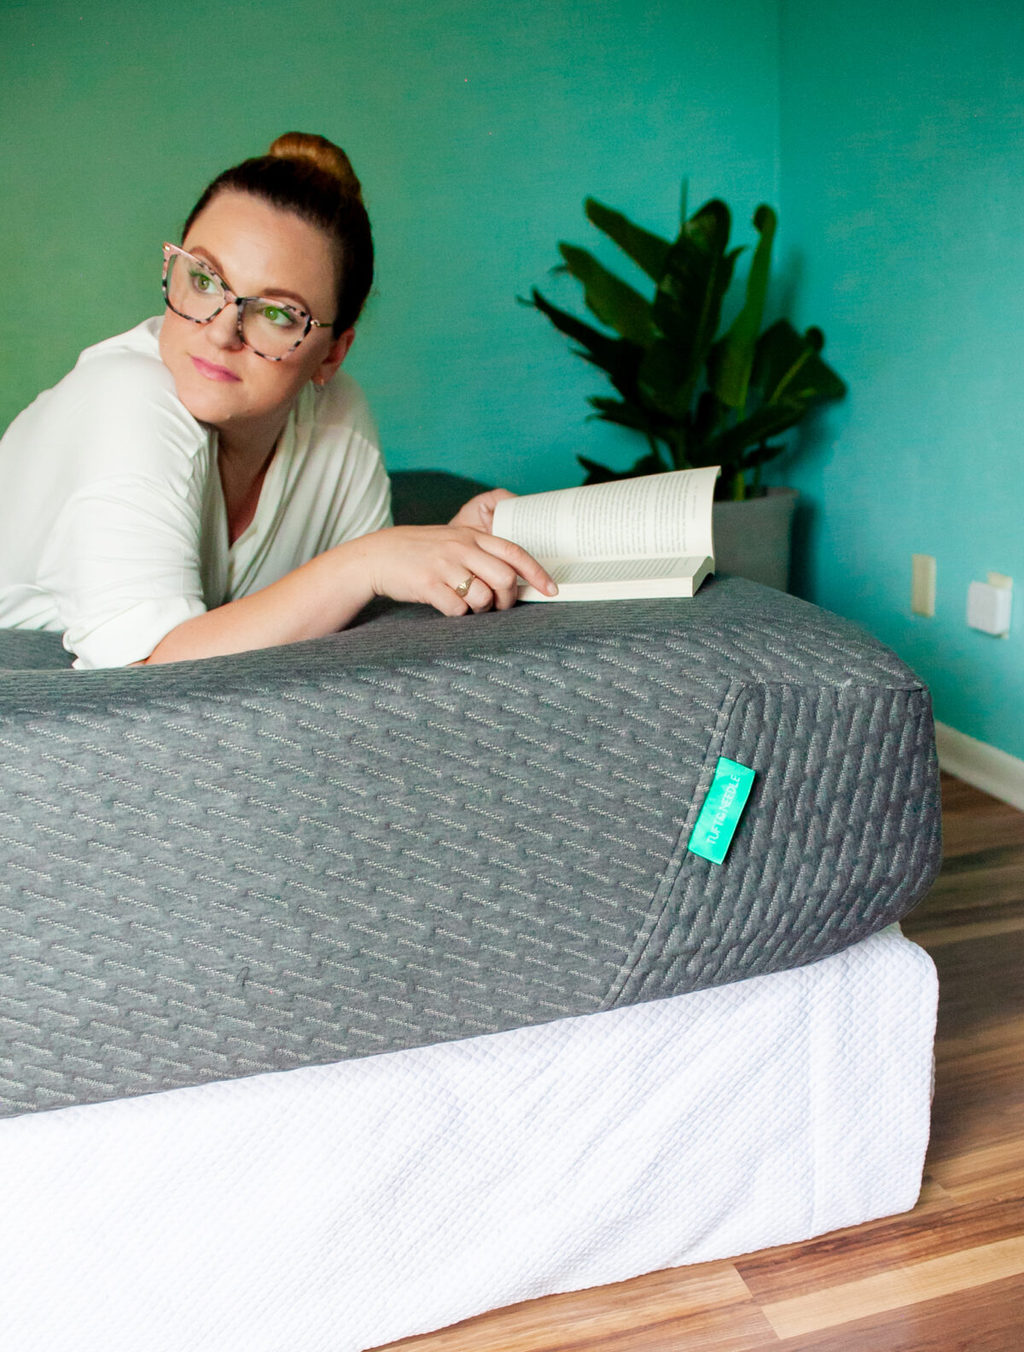 Get A Good Night’s Sleep: Create A Sacred Sleeping Space With The Mint Mattress From Tuft & Needle